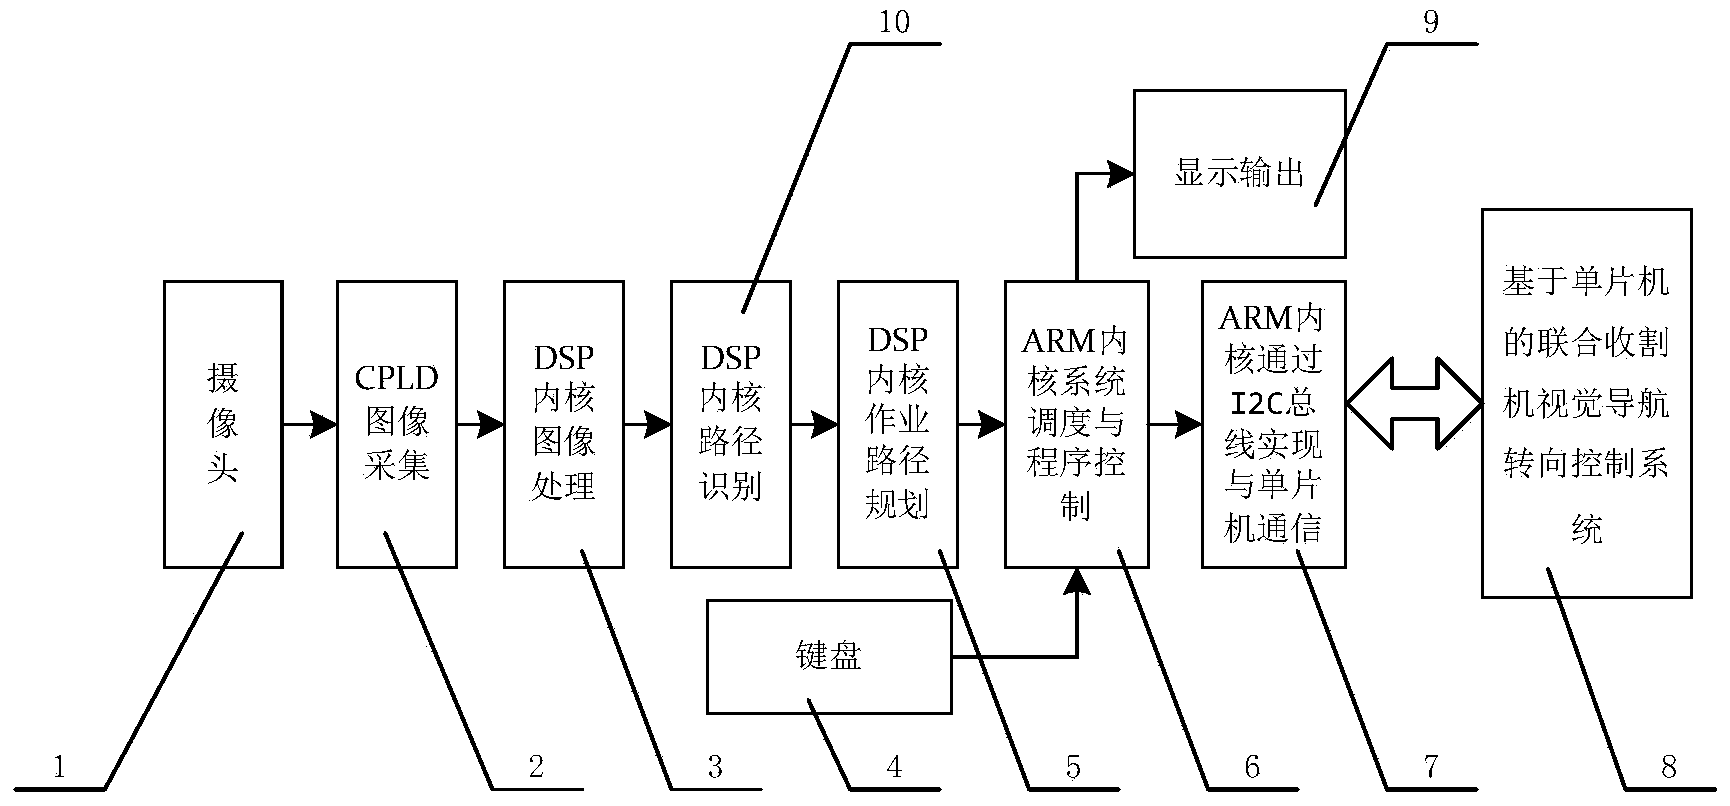 Visual navigation path recognition system of grain combine harvester